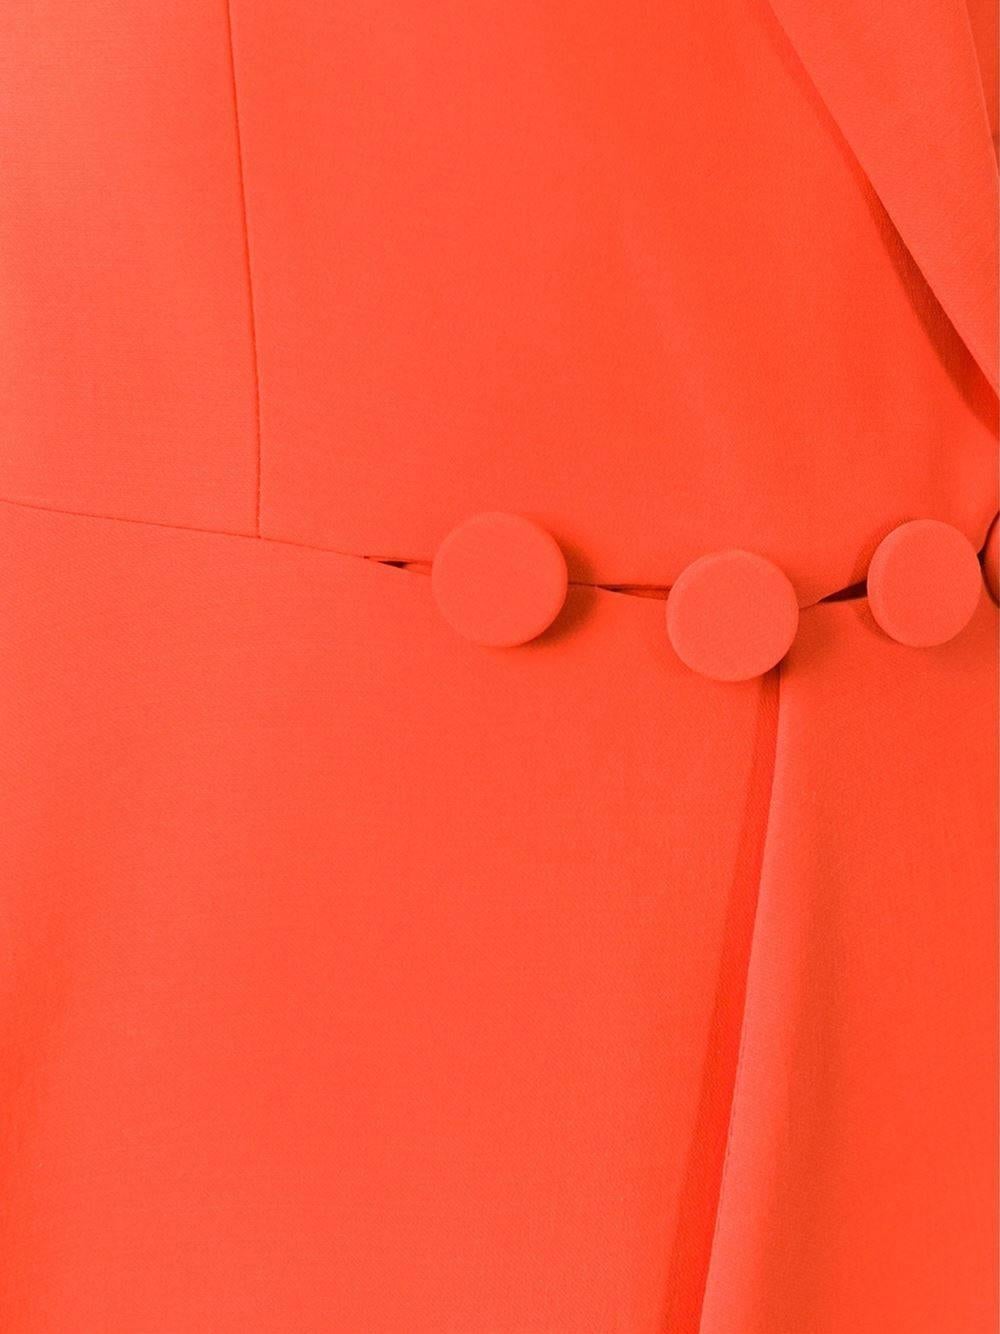 Orange wool-silk blend double breasted flared dress from Christian Dior featuring notched lapels, a sleeveless design, a double breasted front fastening, a fitted waist, a flared style, an asymmetric hem and a mid-length. 

Colour: